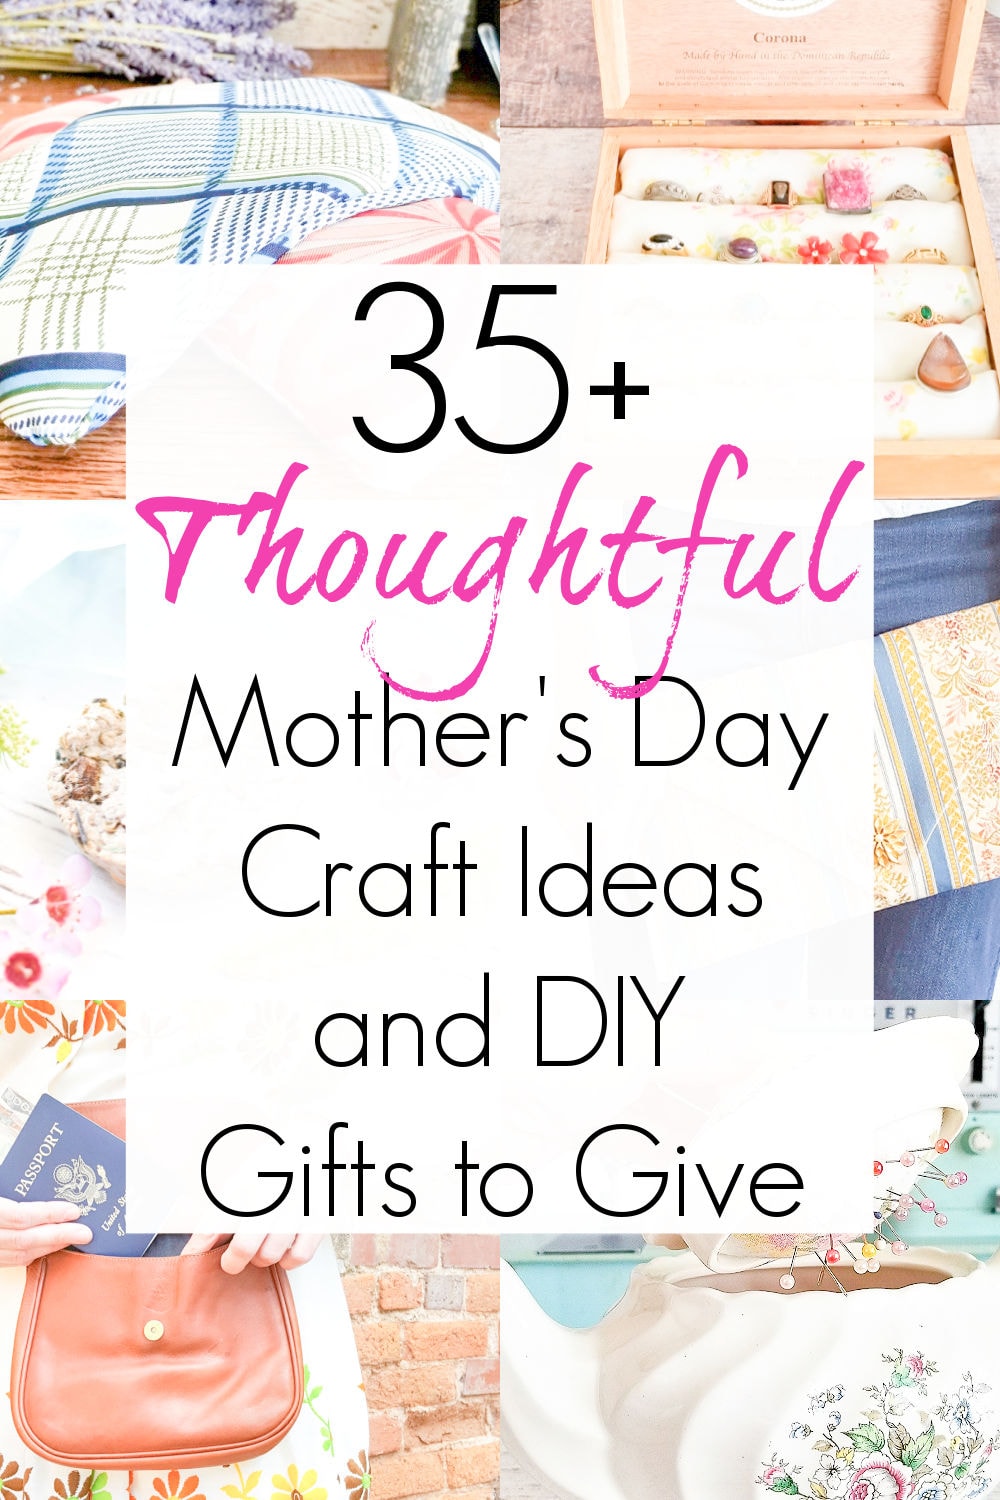 18 Free Printable Mother's Day Crafts for Kids -